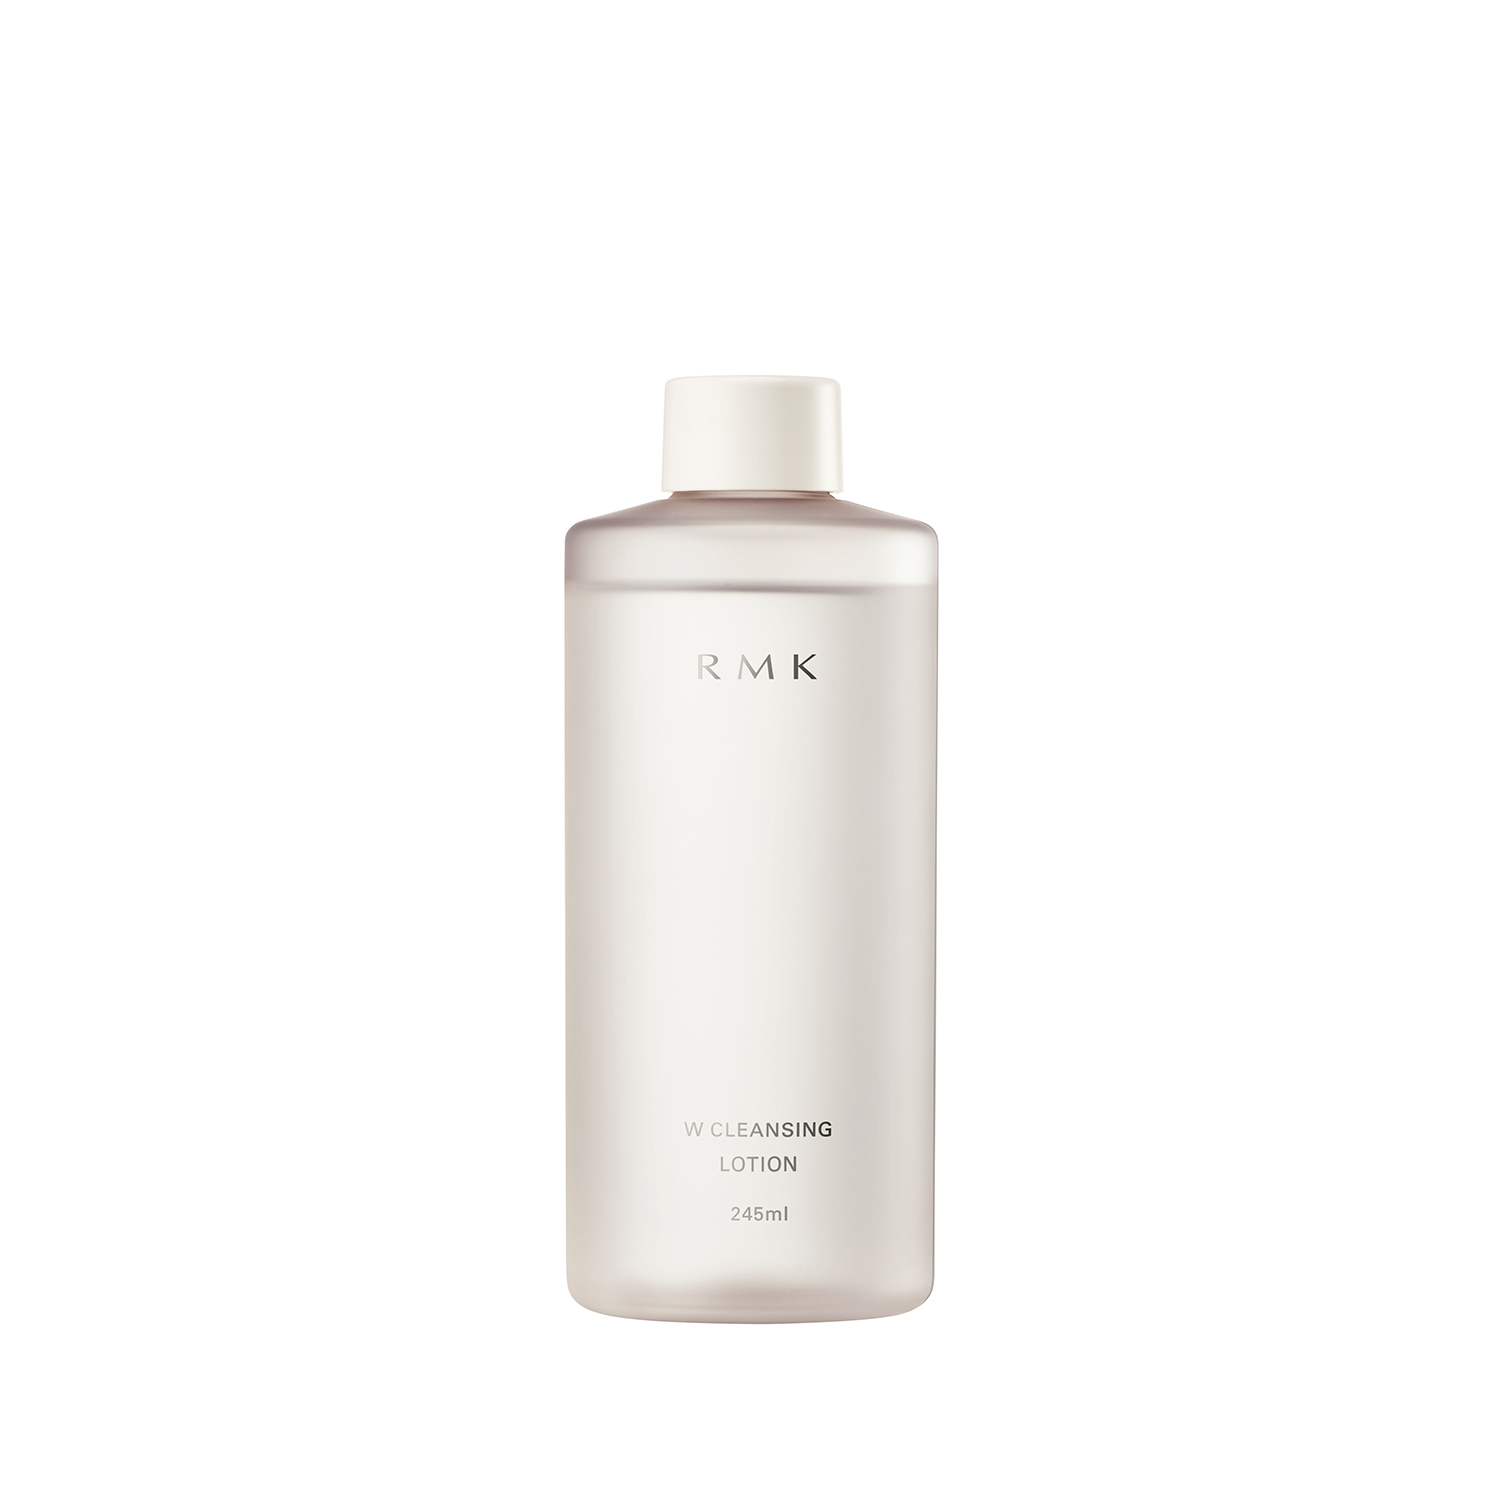 W CLEANSING LOTION (Refill)